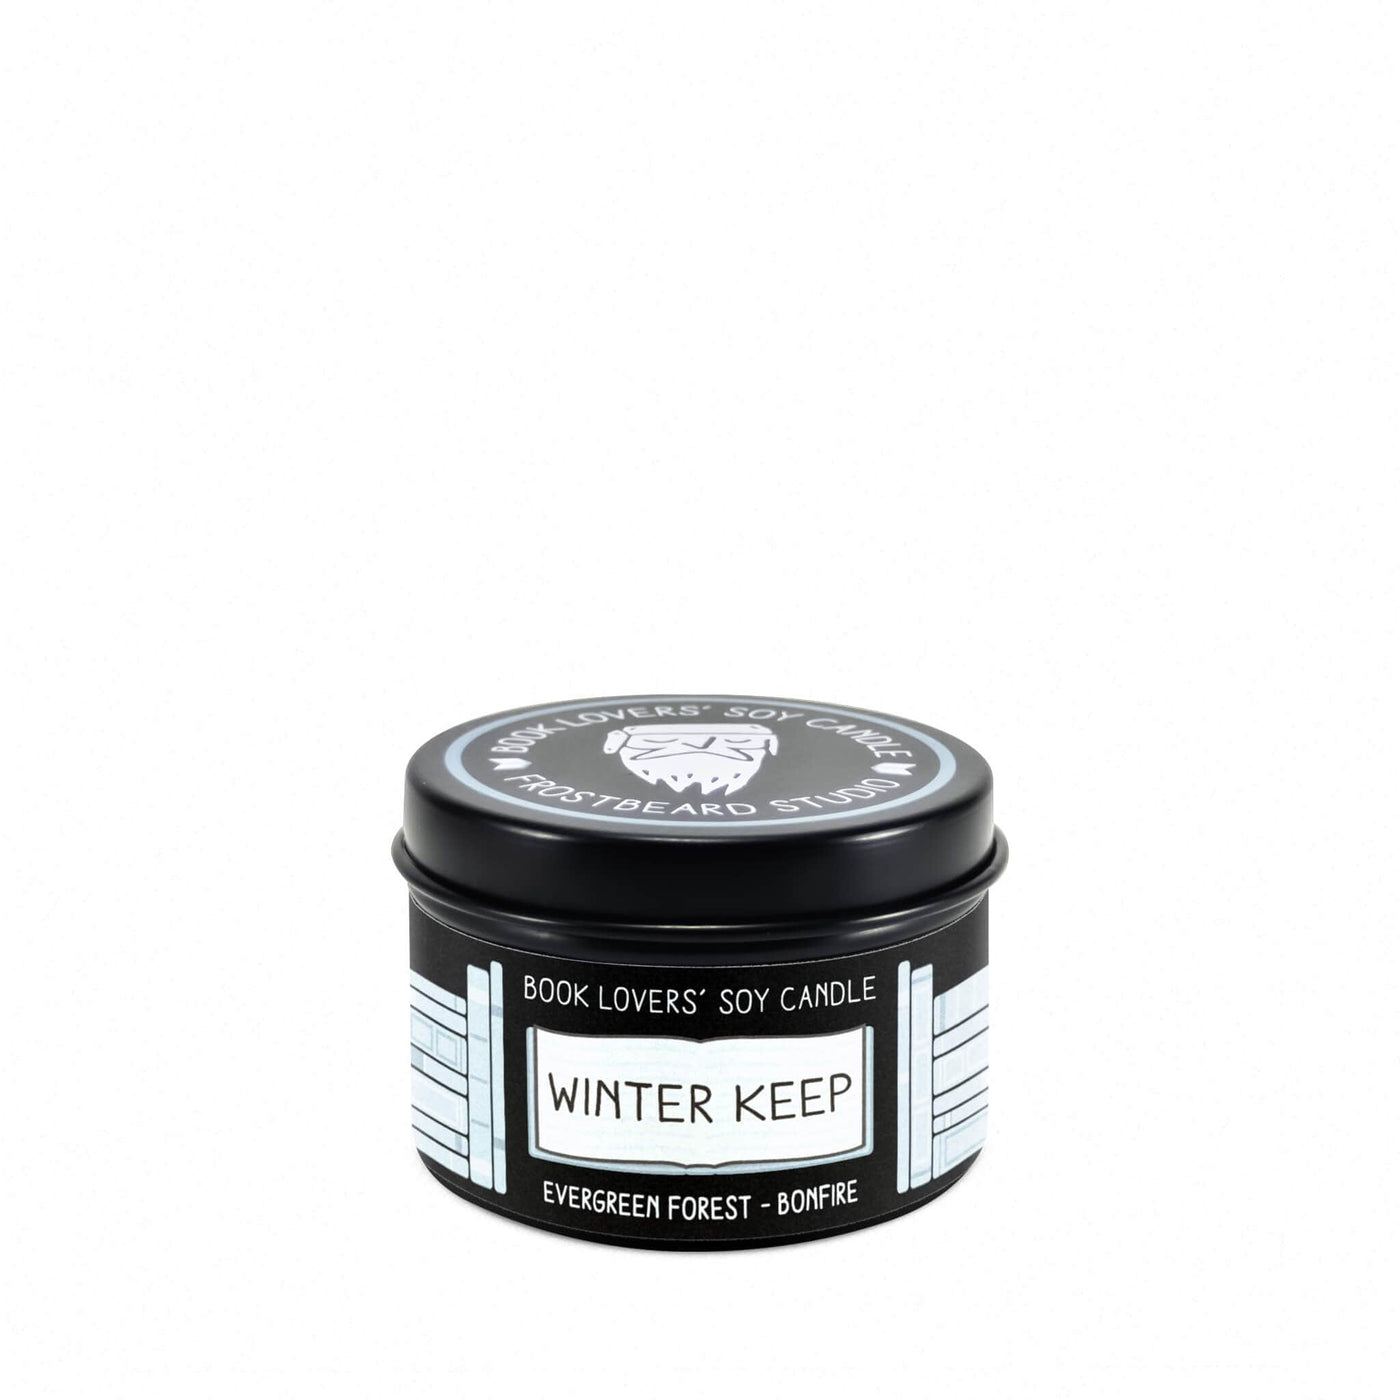 Winter Keep  -  2 oz Tin  -  Book Lovers' Soy Candle  -  Frostbeard Studio